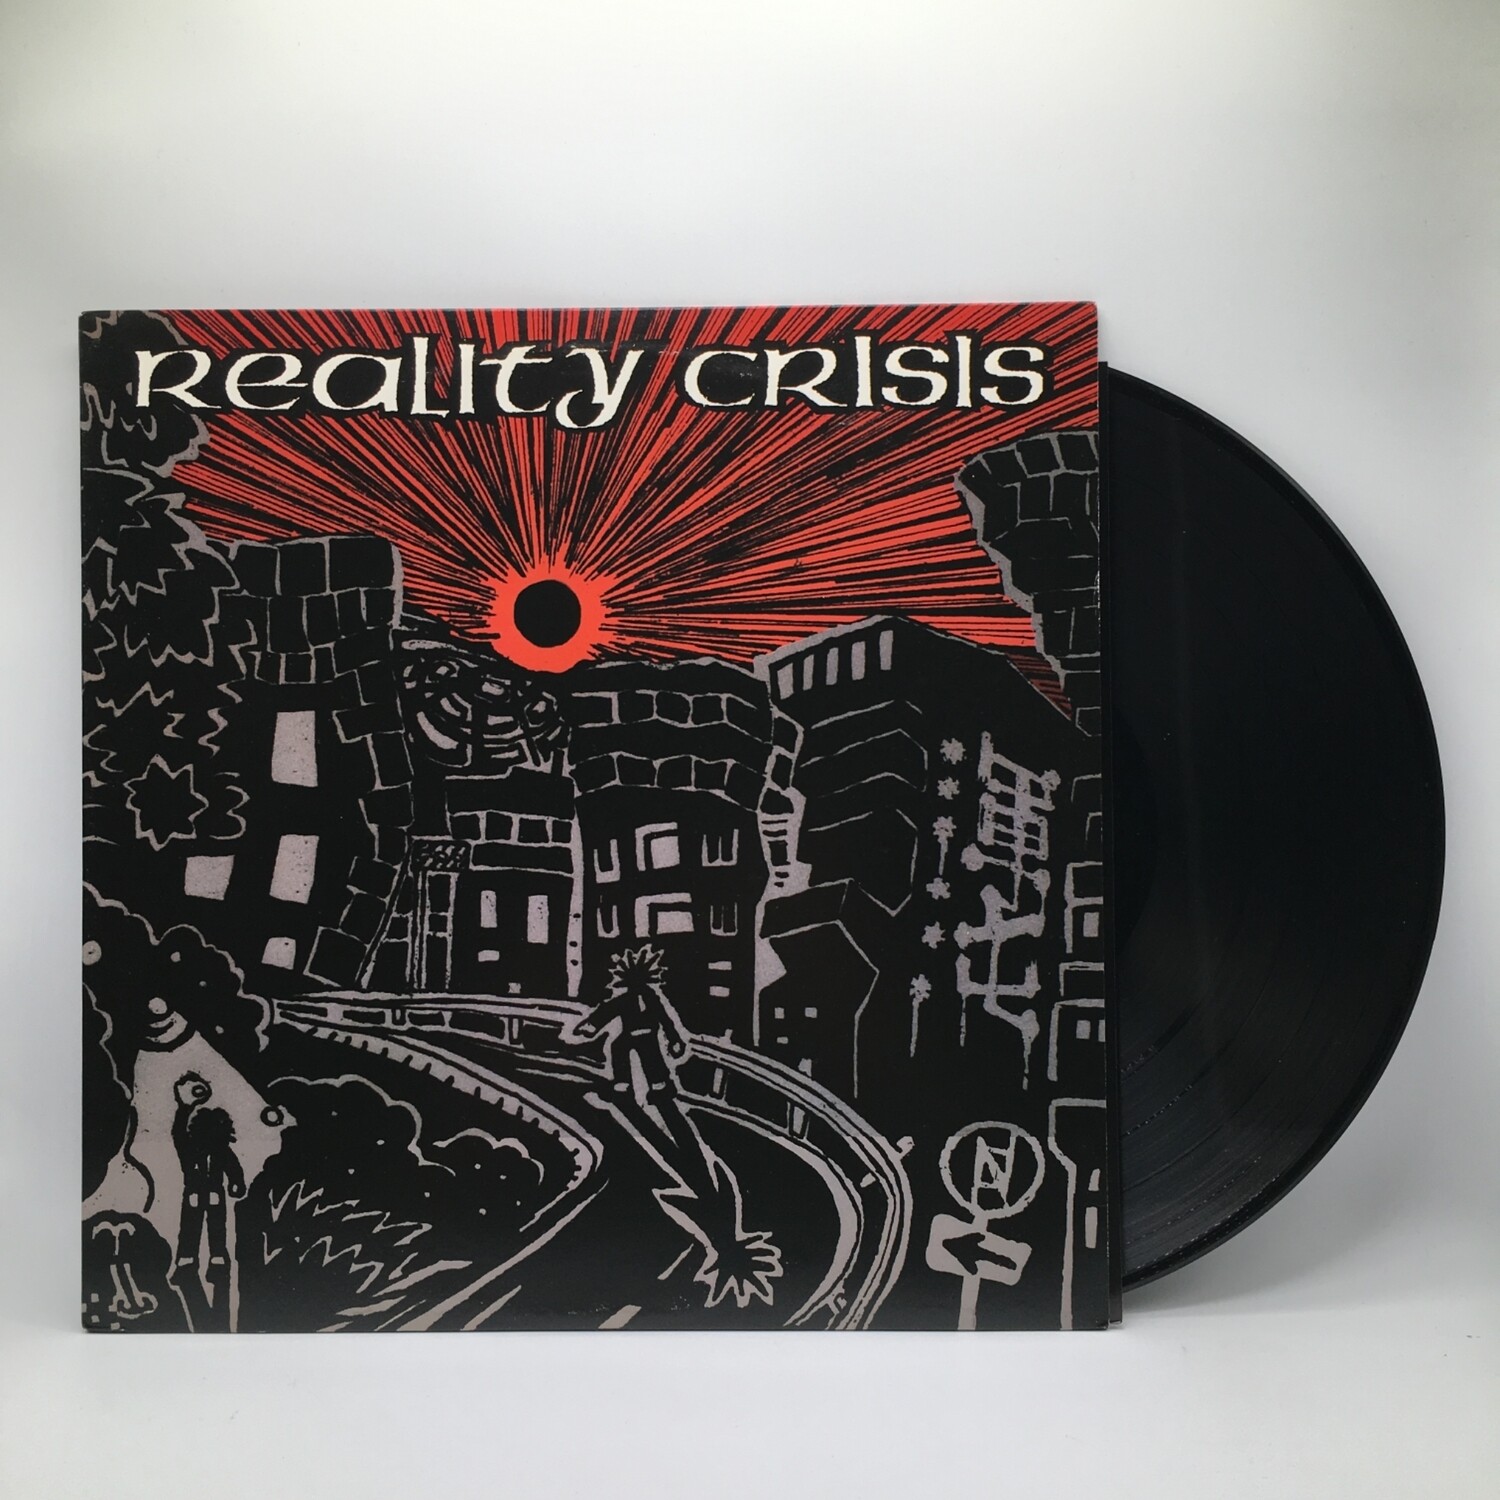 [USED] REALITY CRISIS -OPEN THE DOOR AND INTO THE NEW CHAOTIC WORLD- LP